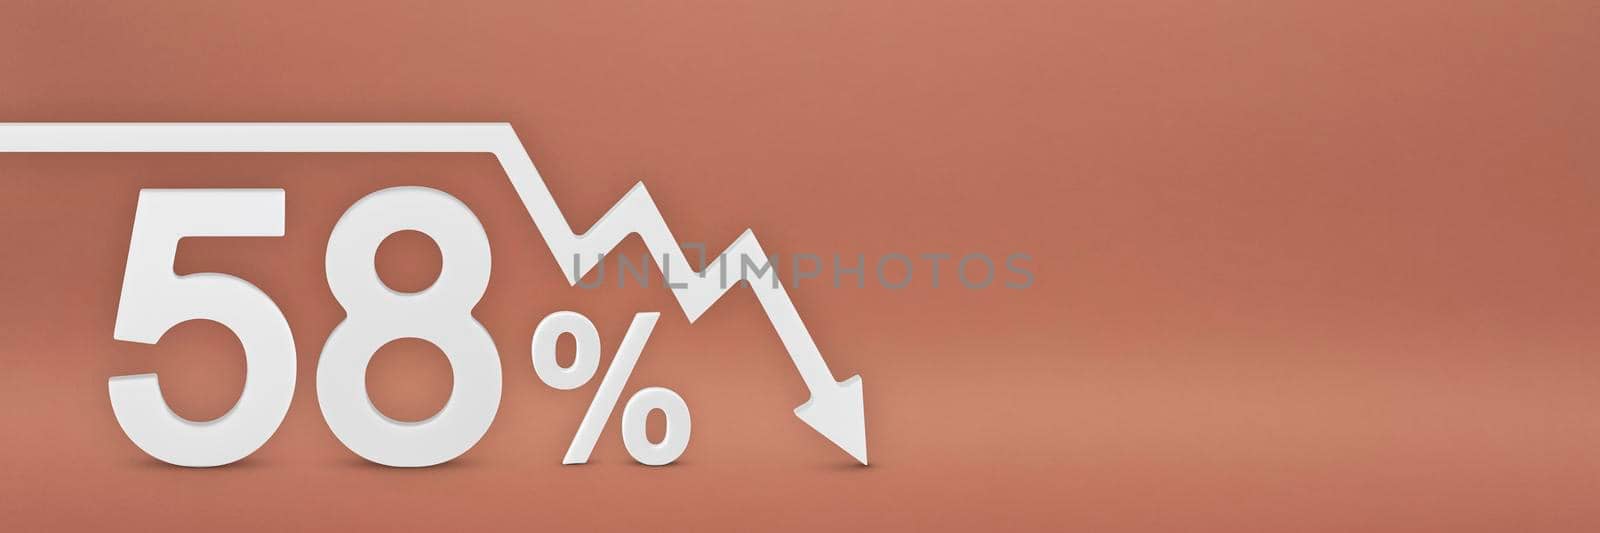 fifty-eight percent, the arrow on the graph is pointing down. Stock market crash, bear market, inflation.Economic collapse, collapse of stocks.3d banner,58 percent discount sign on a red background